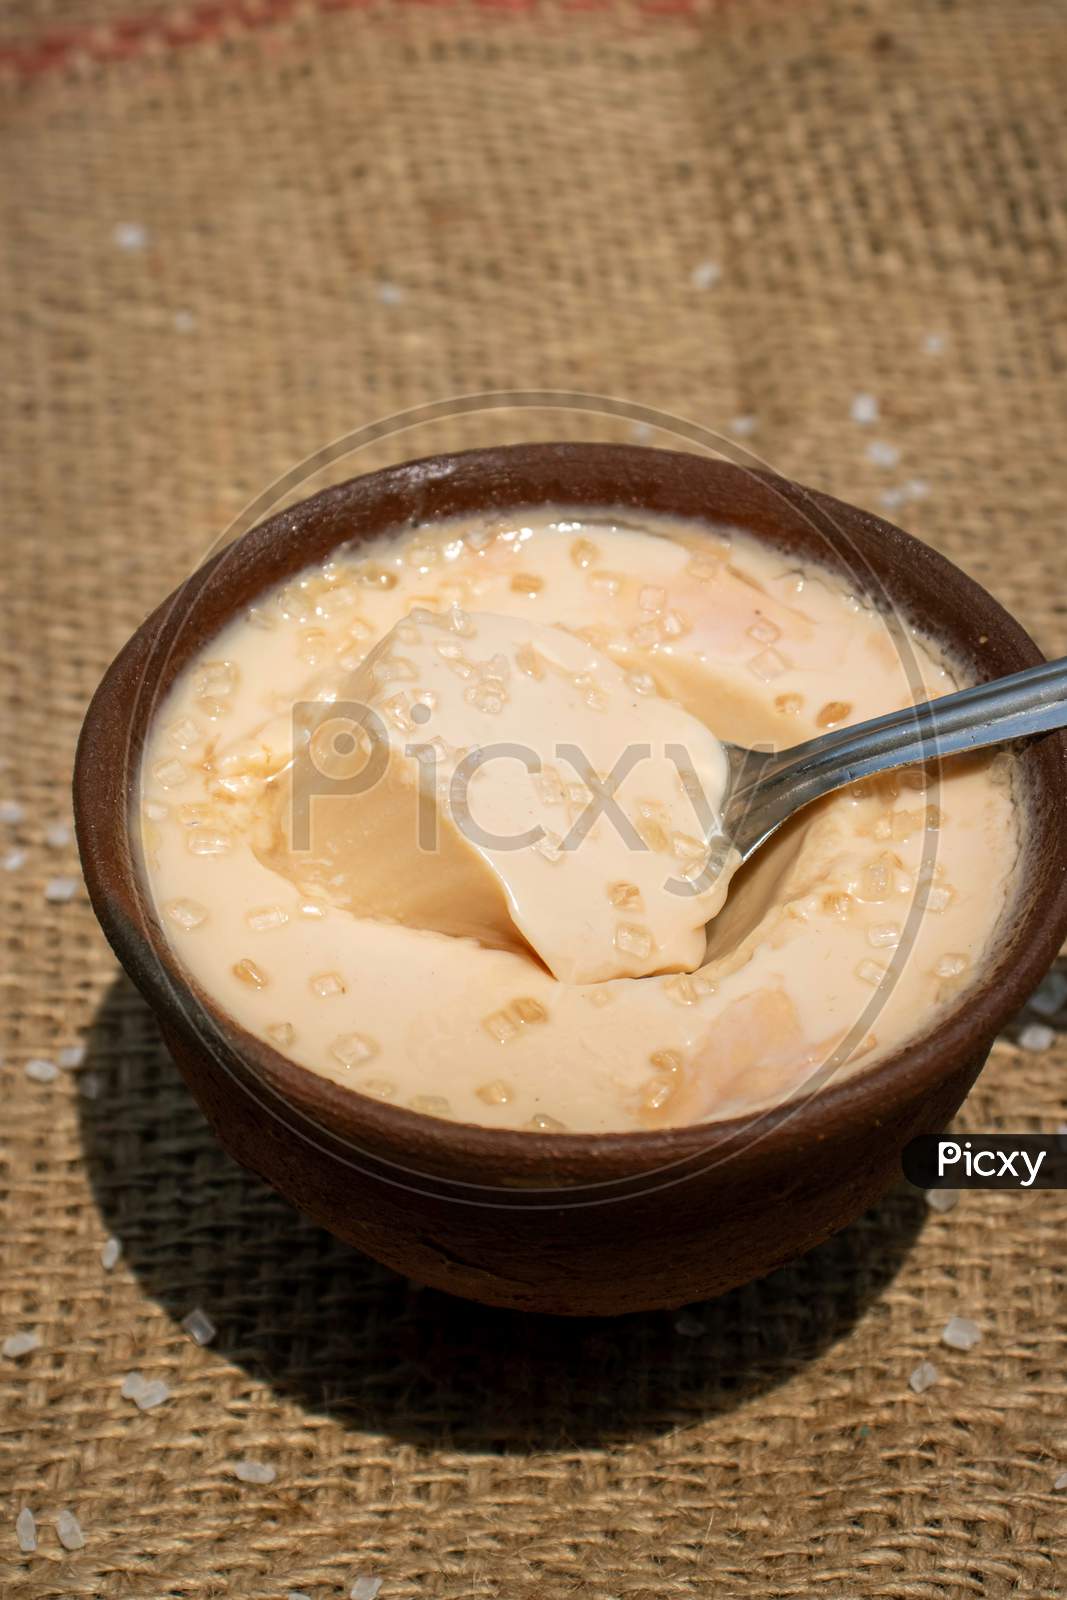 Curd Or Dahi (Yogurt) In An Earthen Bowl With Spoon And Selective Focus In Vertical Orientation